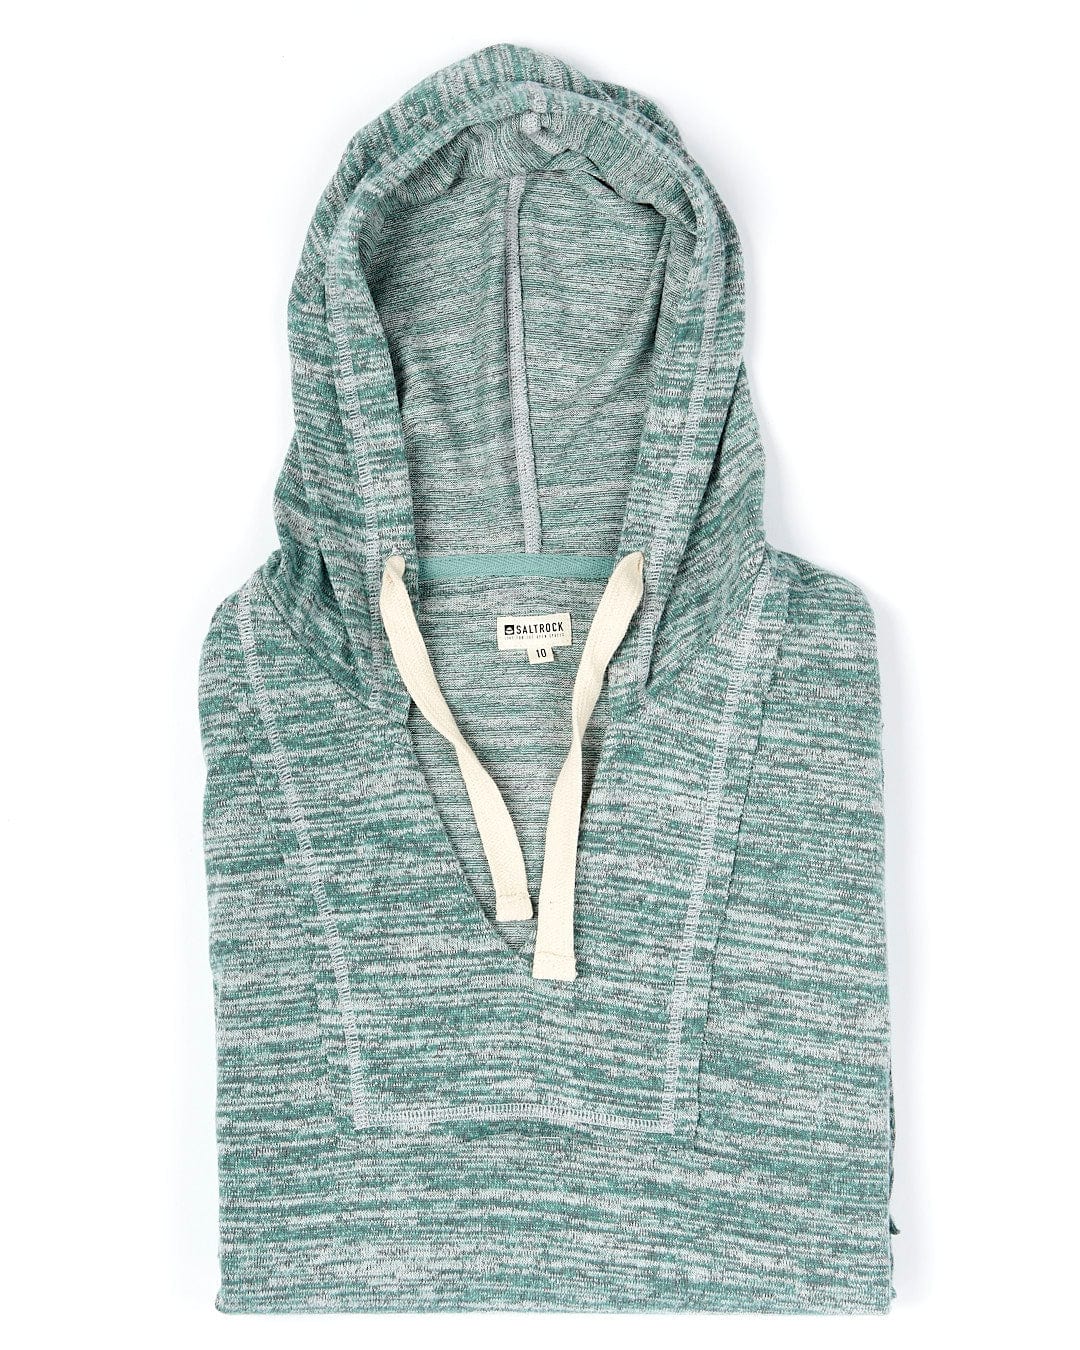 The Saltrock - Daydreamer Womens Pop Hoodie in Green and Grey.